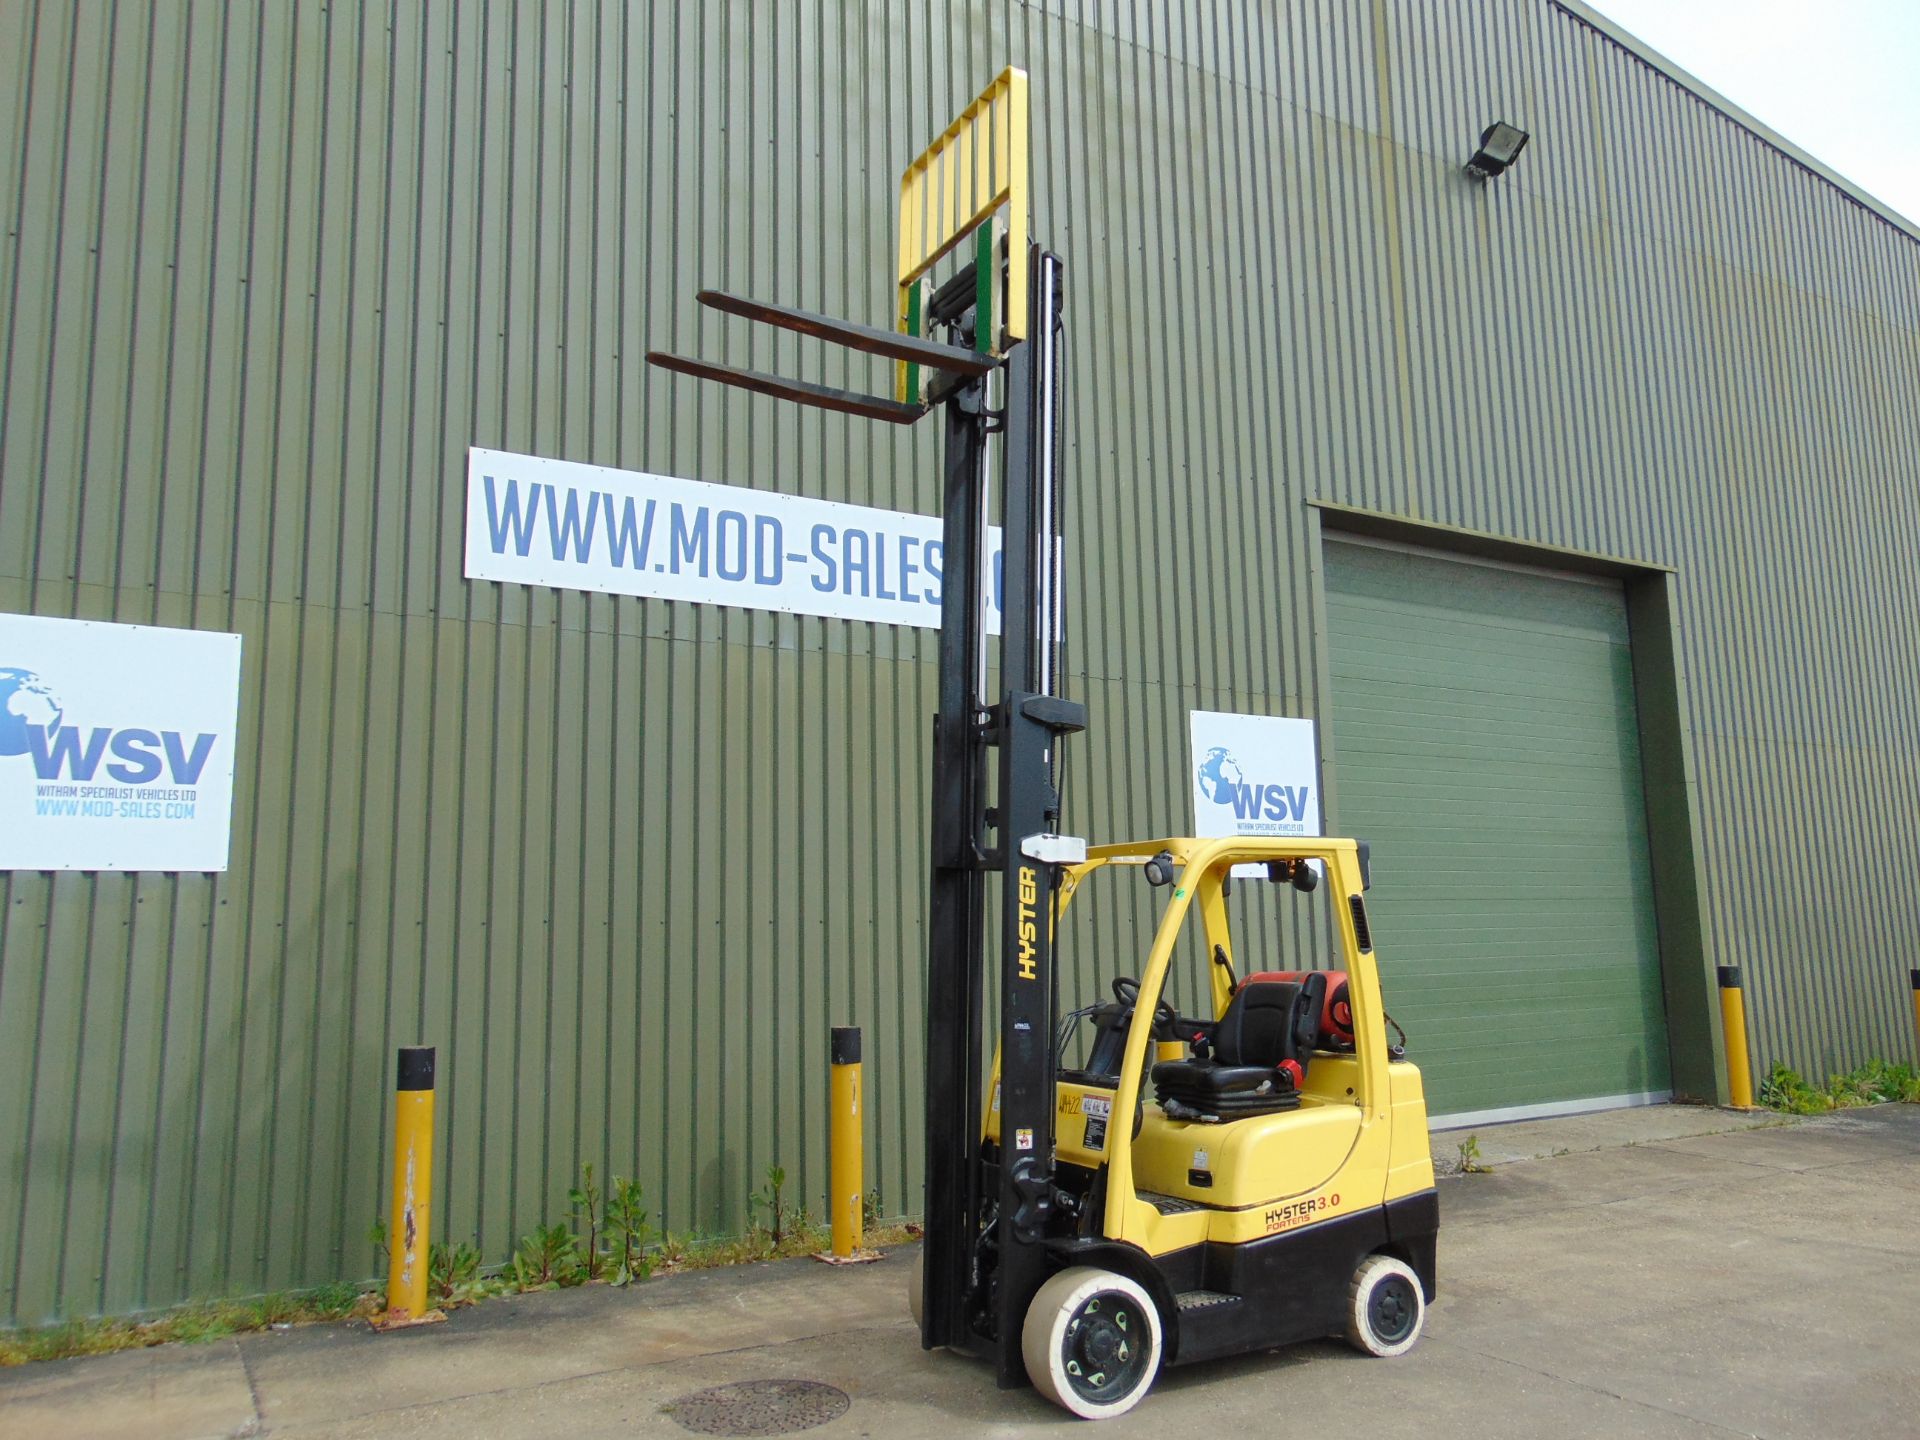 2015 Hyster S3.0FT - LPG / Gas Fork Lift Truck - Image 12 of 50